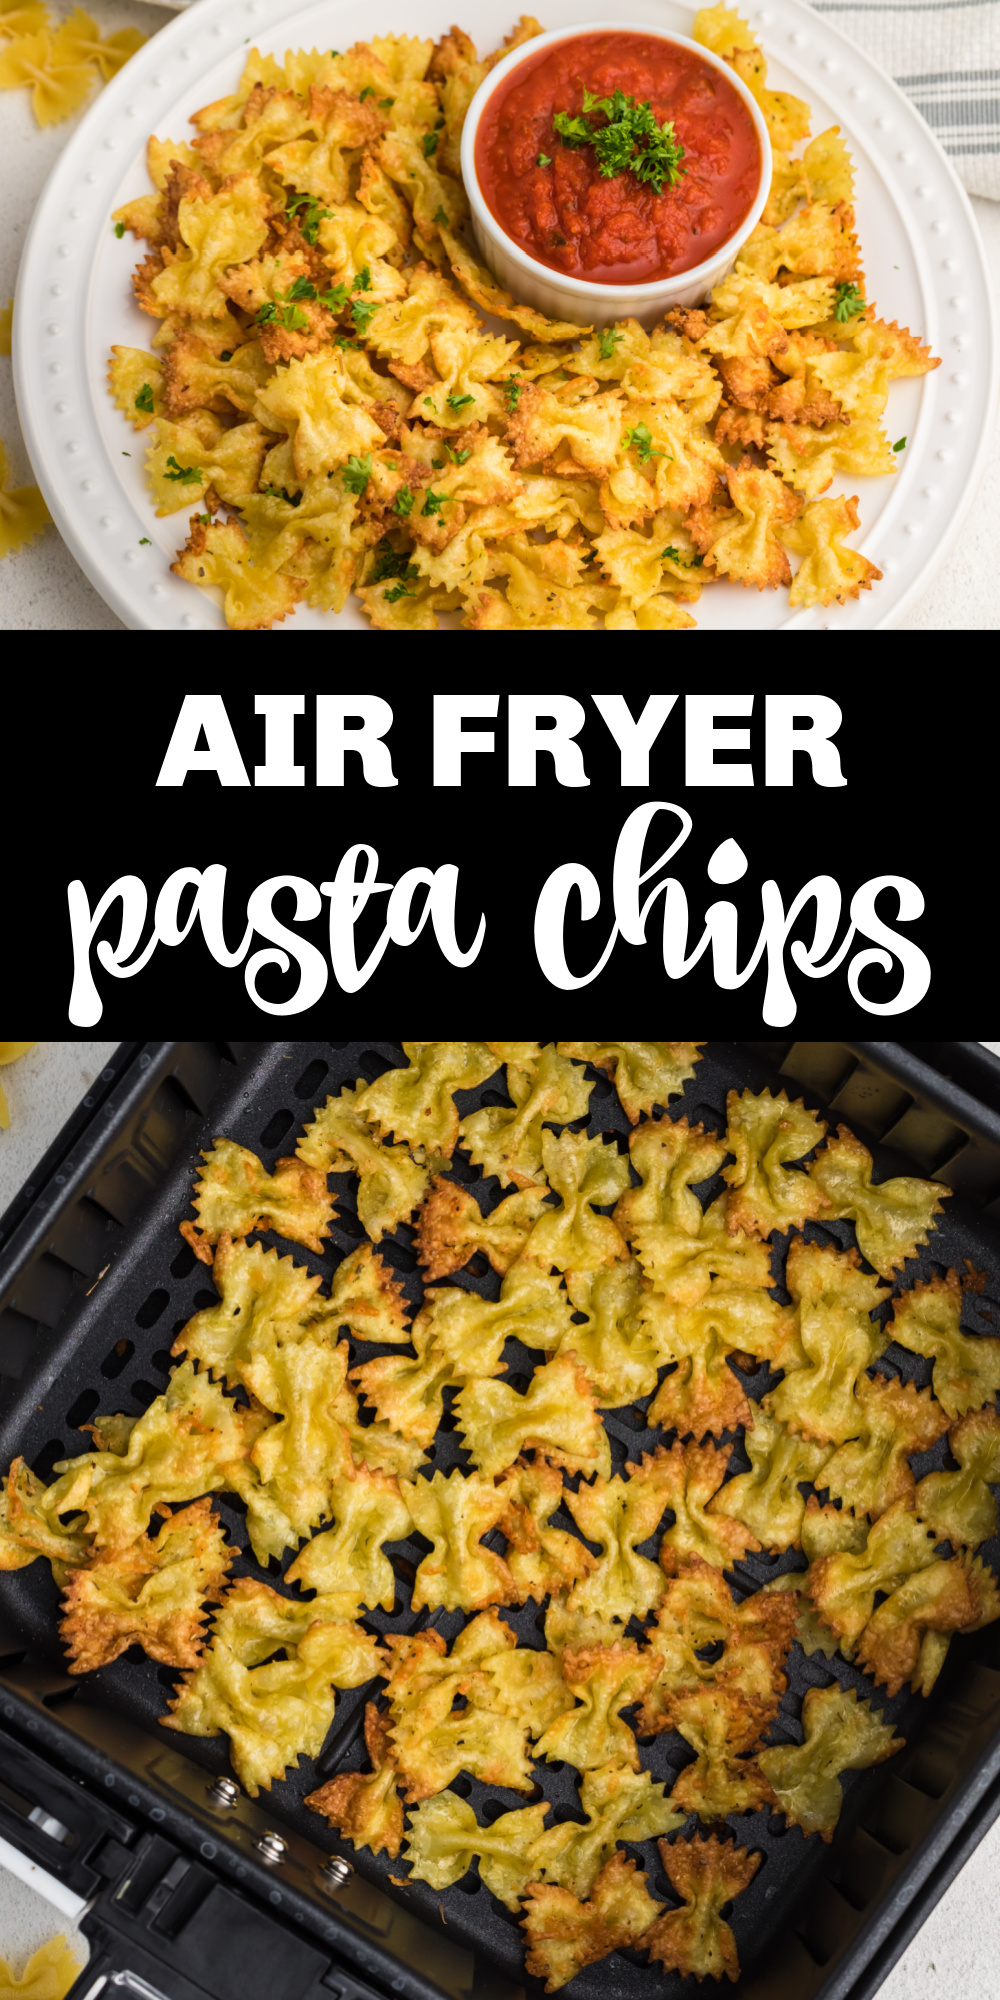 These bowtie air fryer pasta chips are the perfect snack for parties or just because! These crispy, crunchy, delicious baked pasta chips are the perfect combination of everything you love about finger food! Drain and toss cooked pasta with olive oil, yummy parmesan cheese, and Italian seasoning before air-frying until crisp. These pasta chips will quickly become one of your favorite snacks. Serve your chips with an array of dips, and you've got yourself a crowd-pleaser.